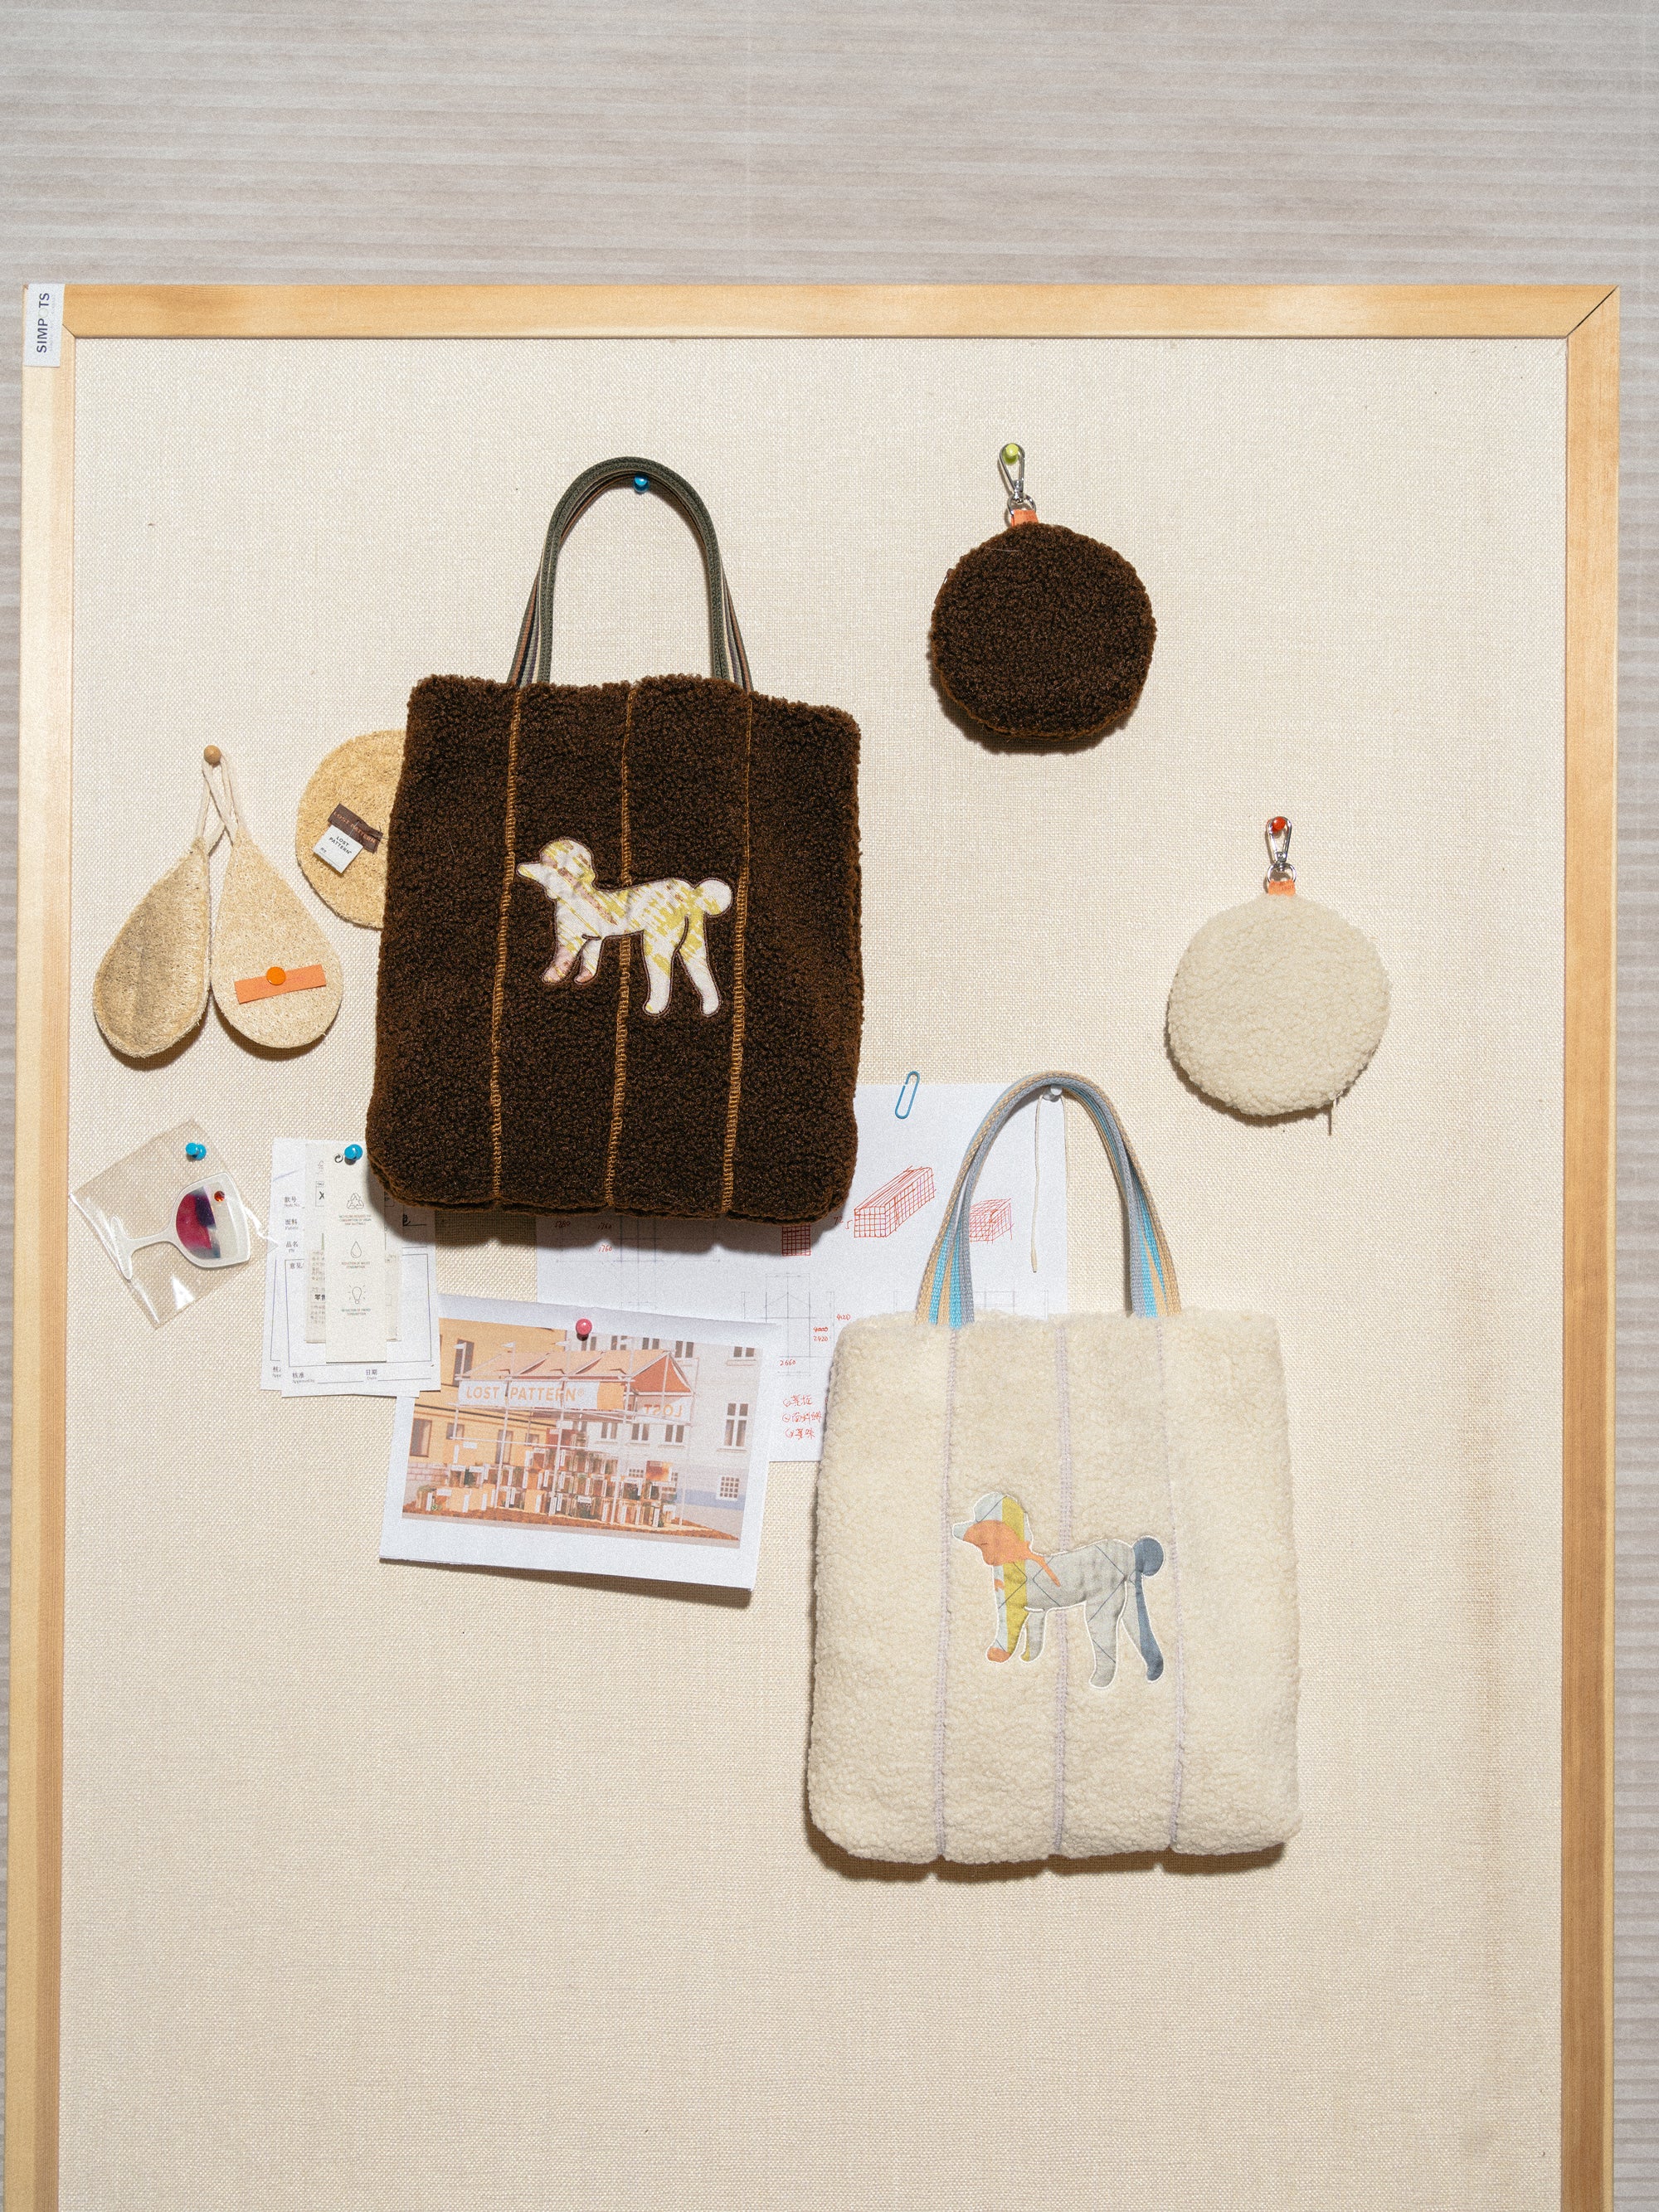 Sherpa Tote Bag with Dog Motif Embroidery in Silk - White - LOST PATTERN Tote Bag